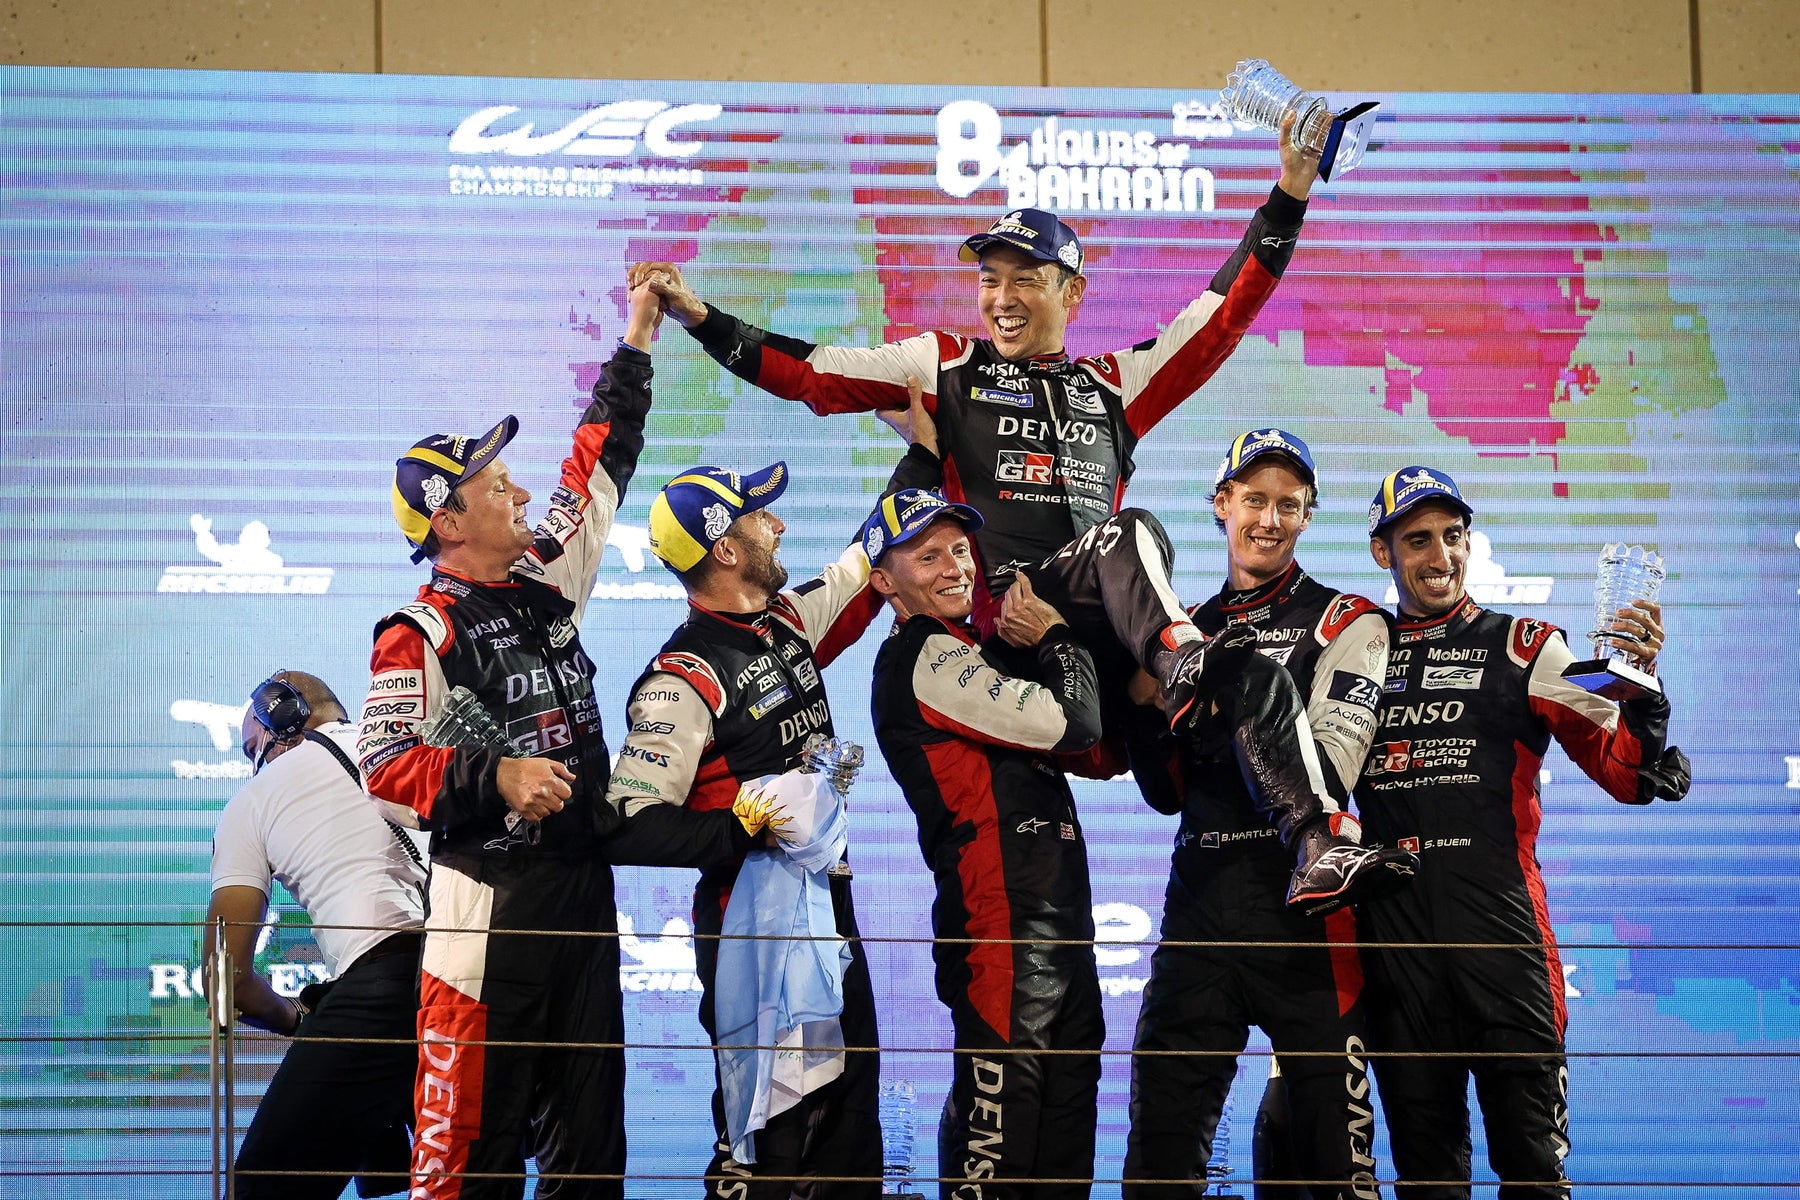 KAMUI KOBAYASHI, JOSE MARIA LOPEZ AND MIKE CONWAY ARE THE FIA WORLD ENDURANCE CHAMPIONSHIP'S FIRST-EVER HYPERCAR CHAMPIONS